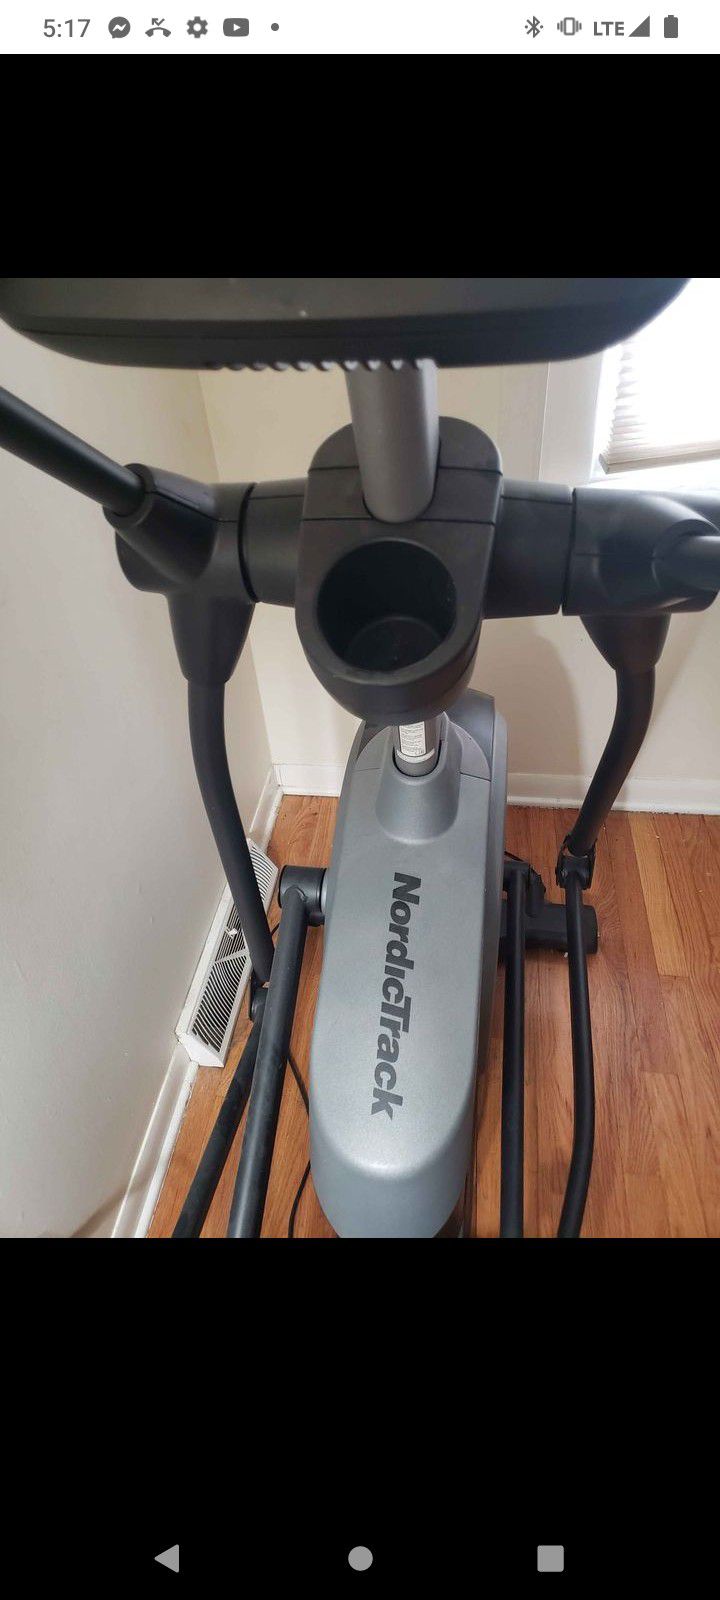 NORDICTRACK 10.9I ELLIPTICAL MACHINE ( LIKE NEW & DELIVERY AVAILABLE TODAY)